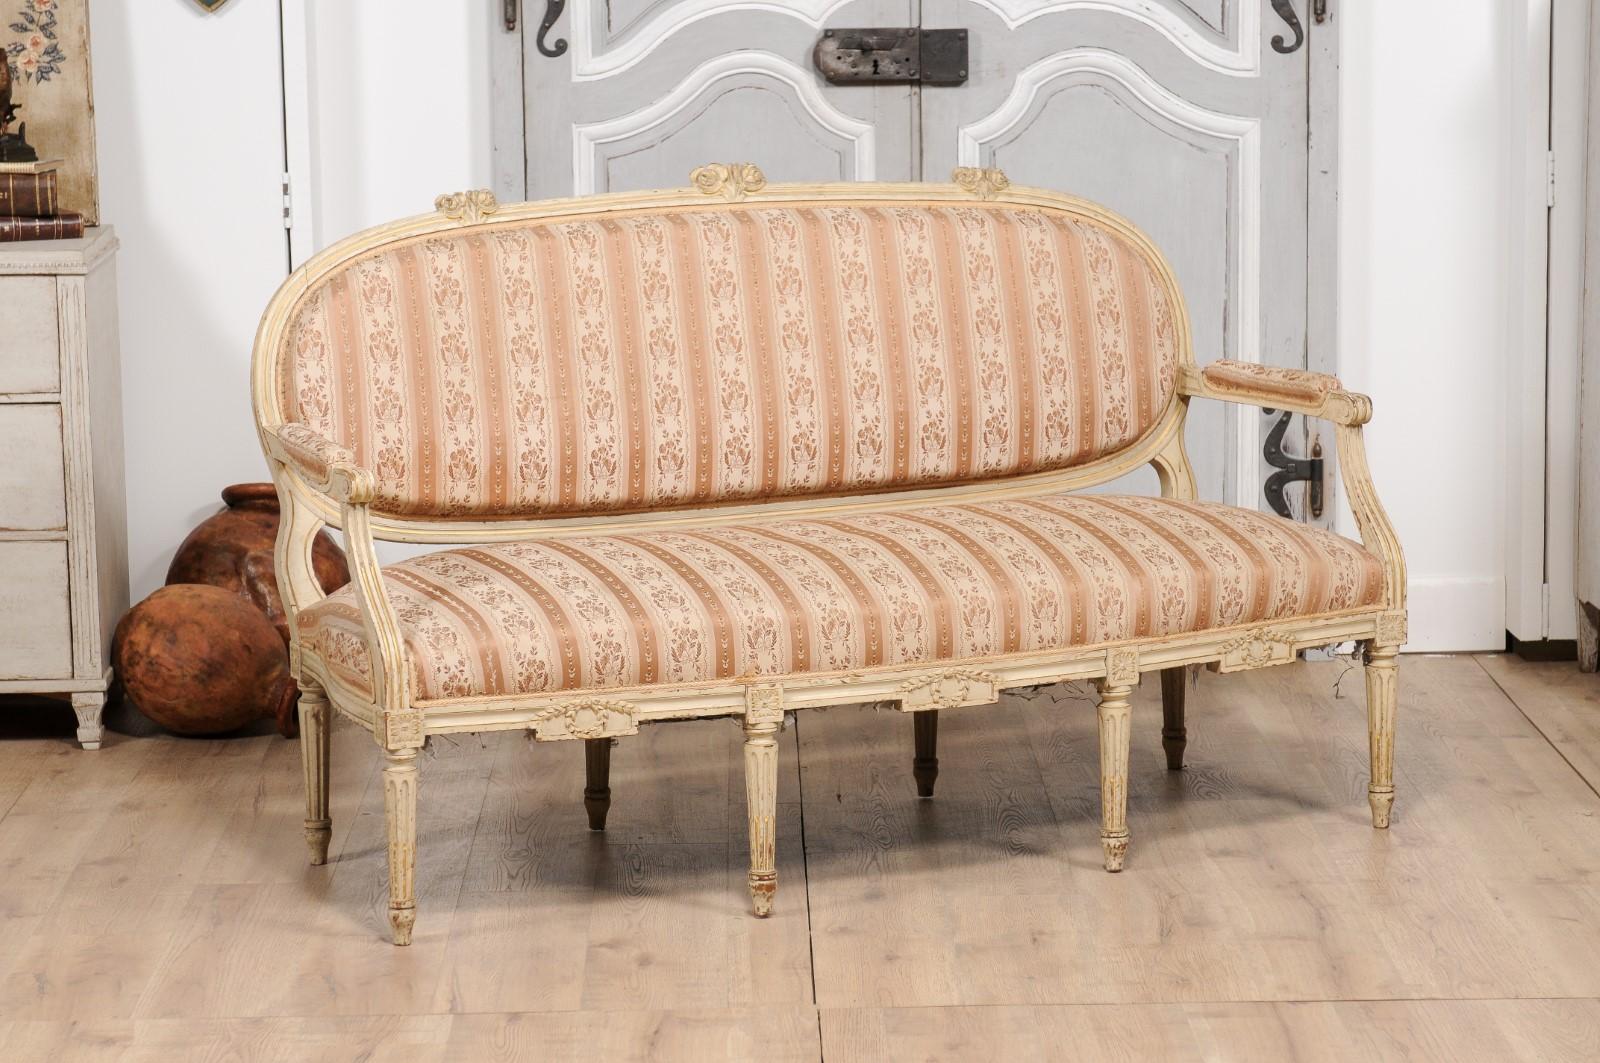 1790s Louis XVI Period French Painted Sofa with Oval Back and Carved Foliage In Good Condition For Sale In Atlanta, GA